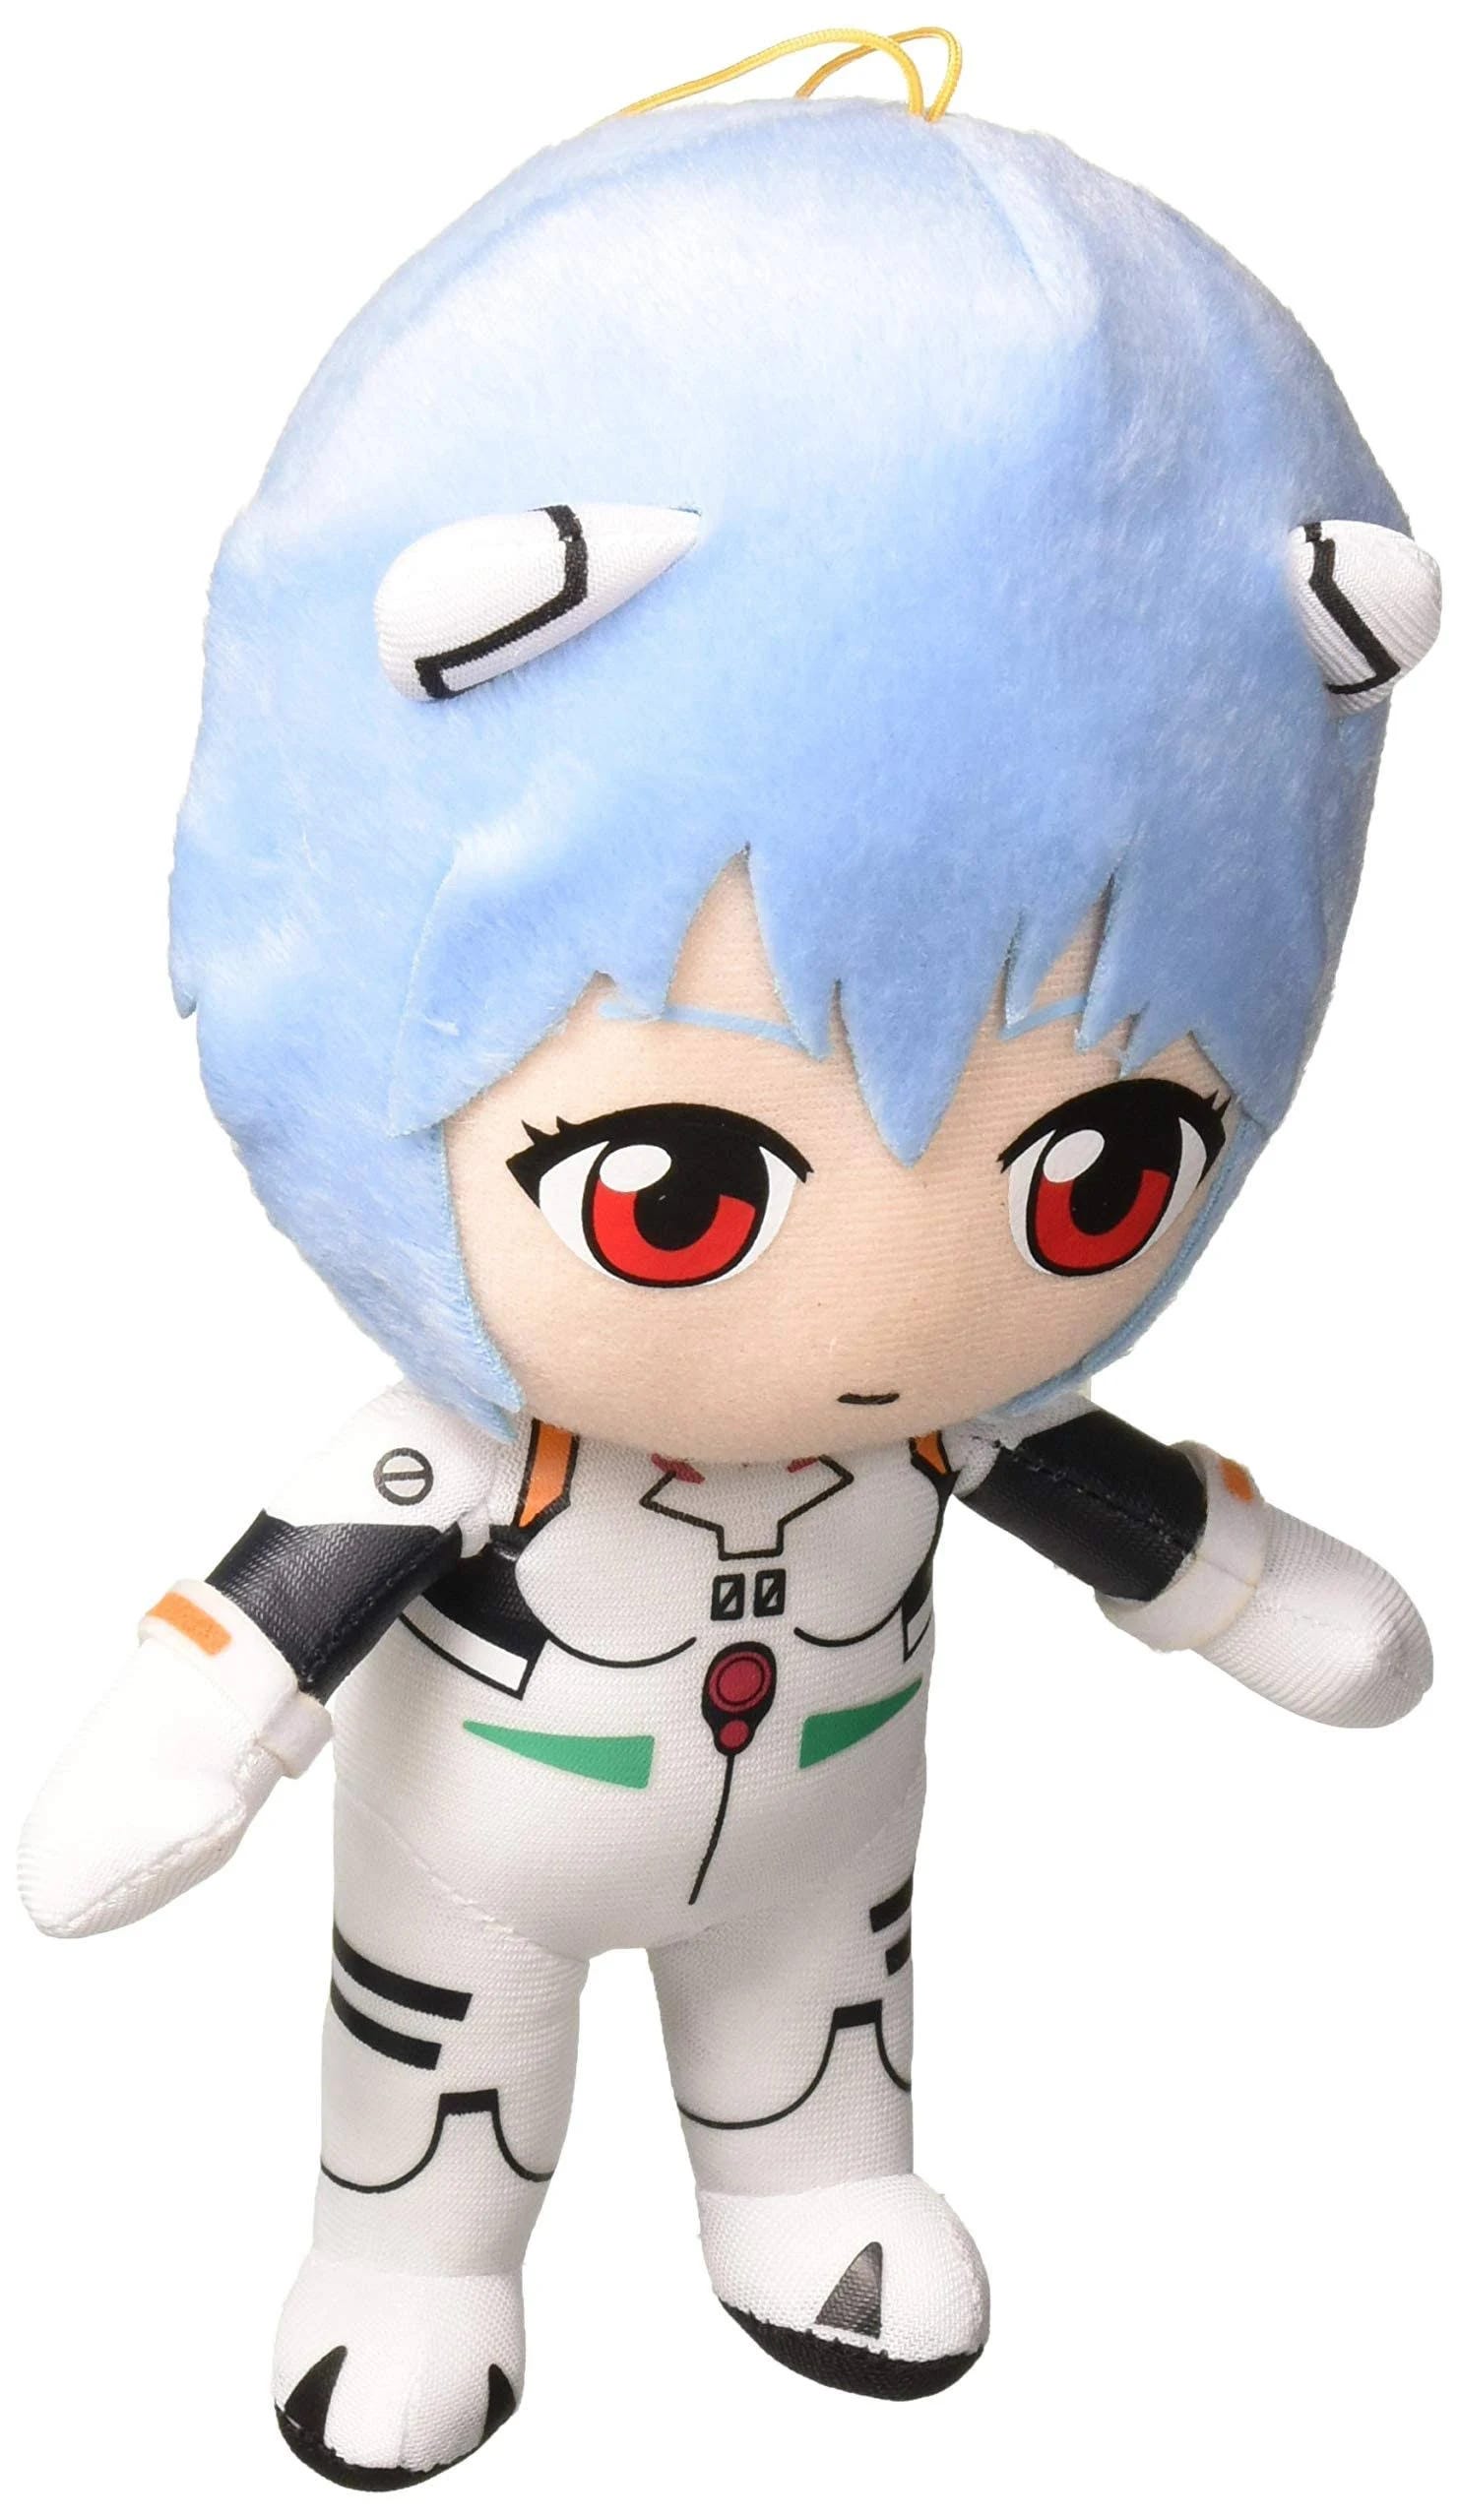 Evangelion - Rei Plugsuit Plush: Perfect Gift for Anime Fans | Image